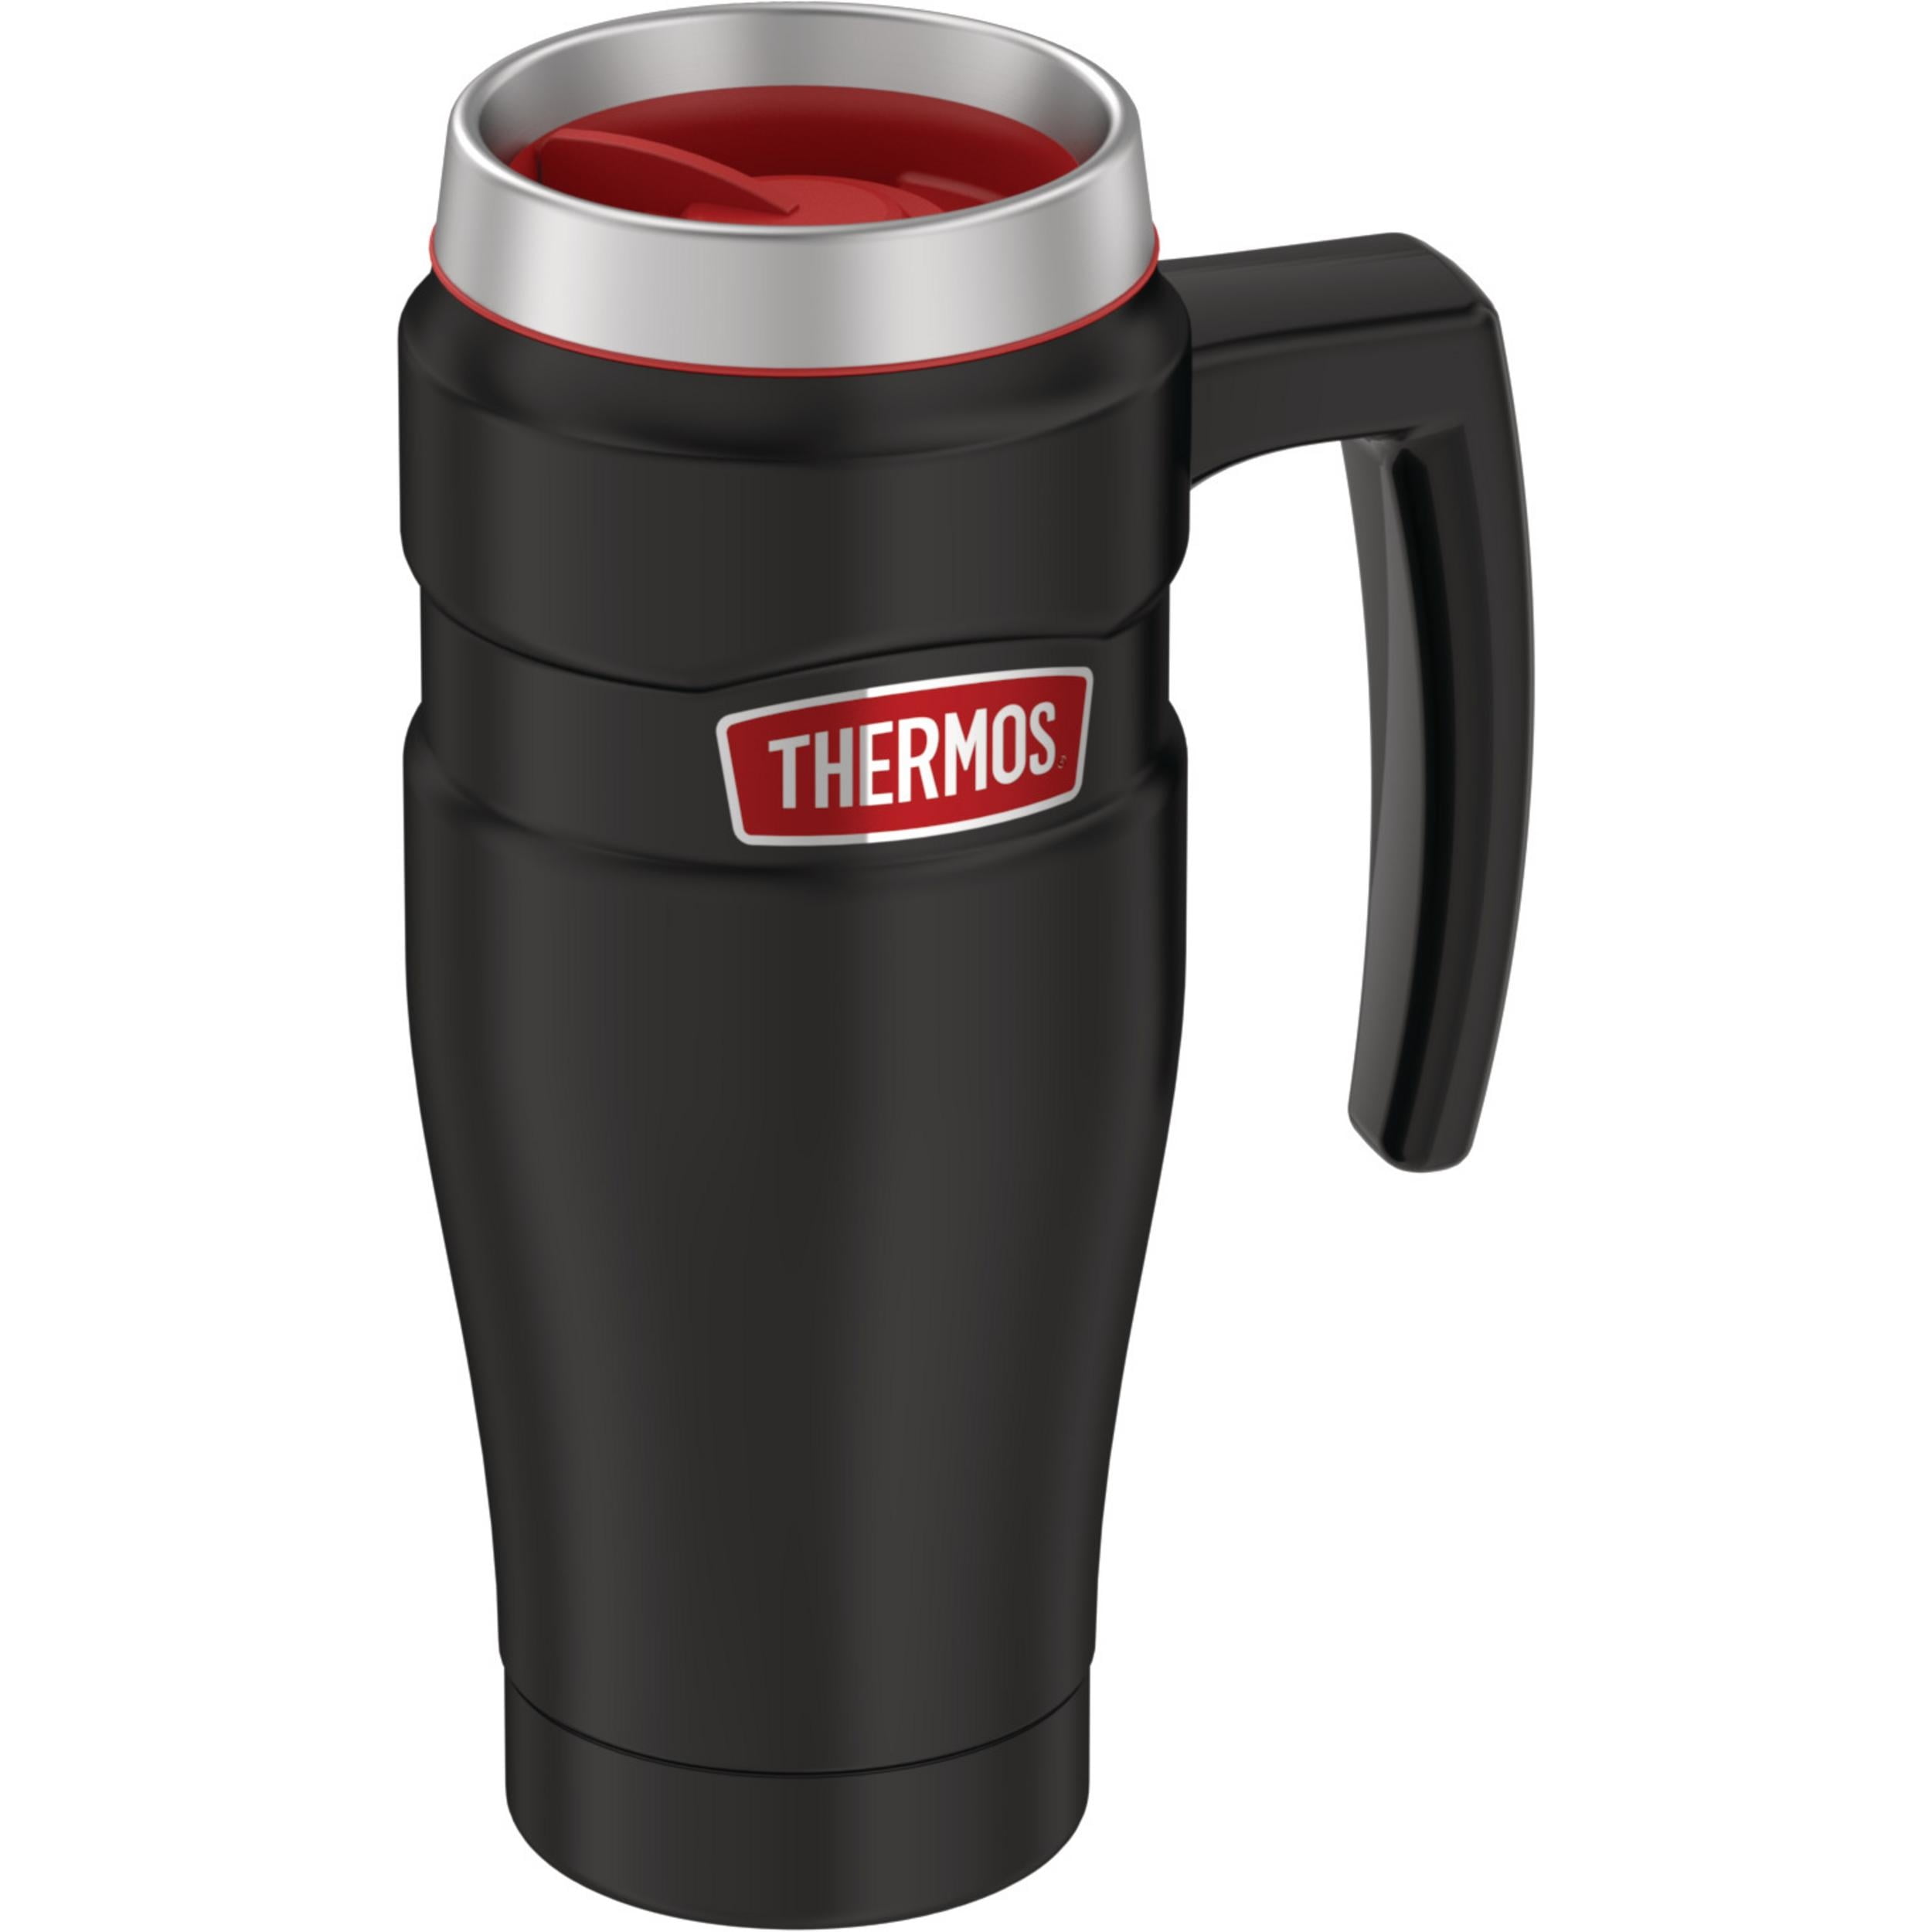 16 oz. thermos stainless king stainless steel travel mug